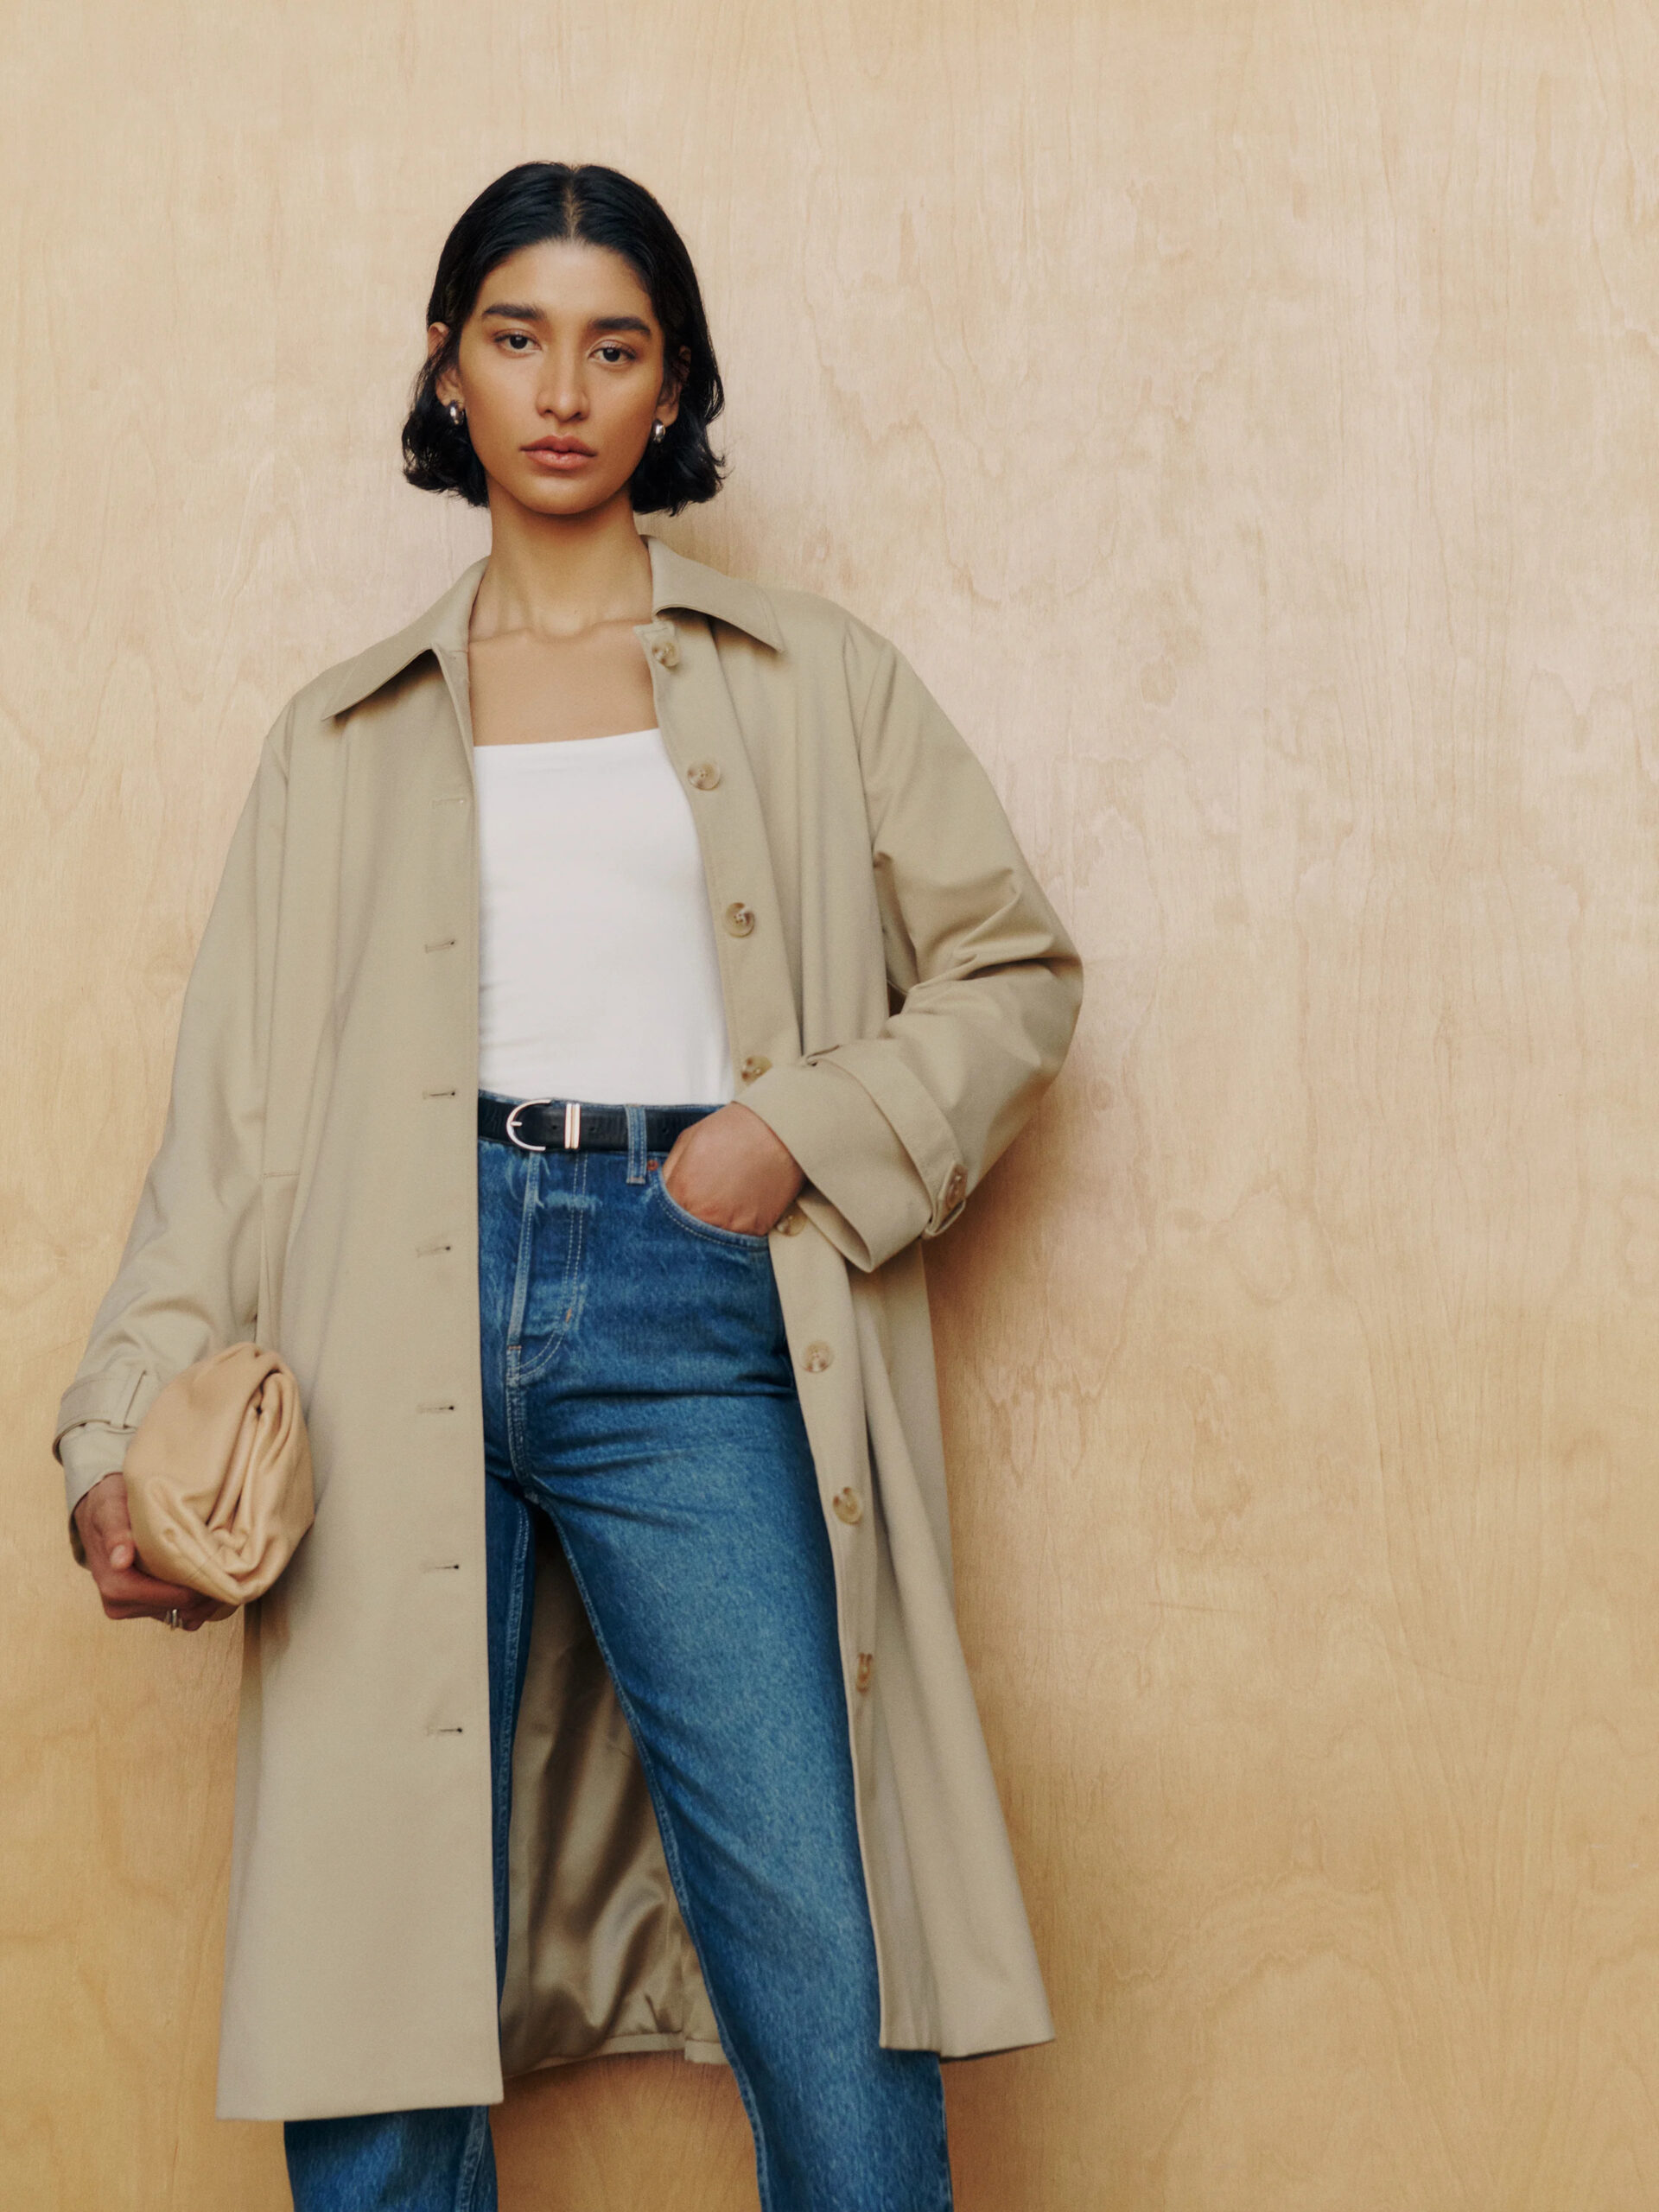 A model wearing a Reformation trench coat in a camel color.